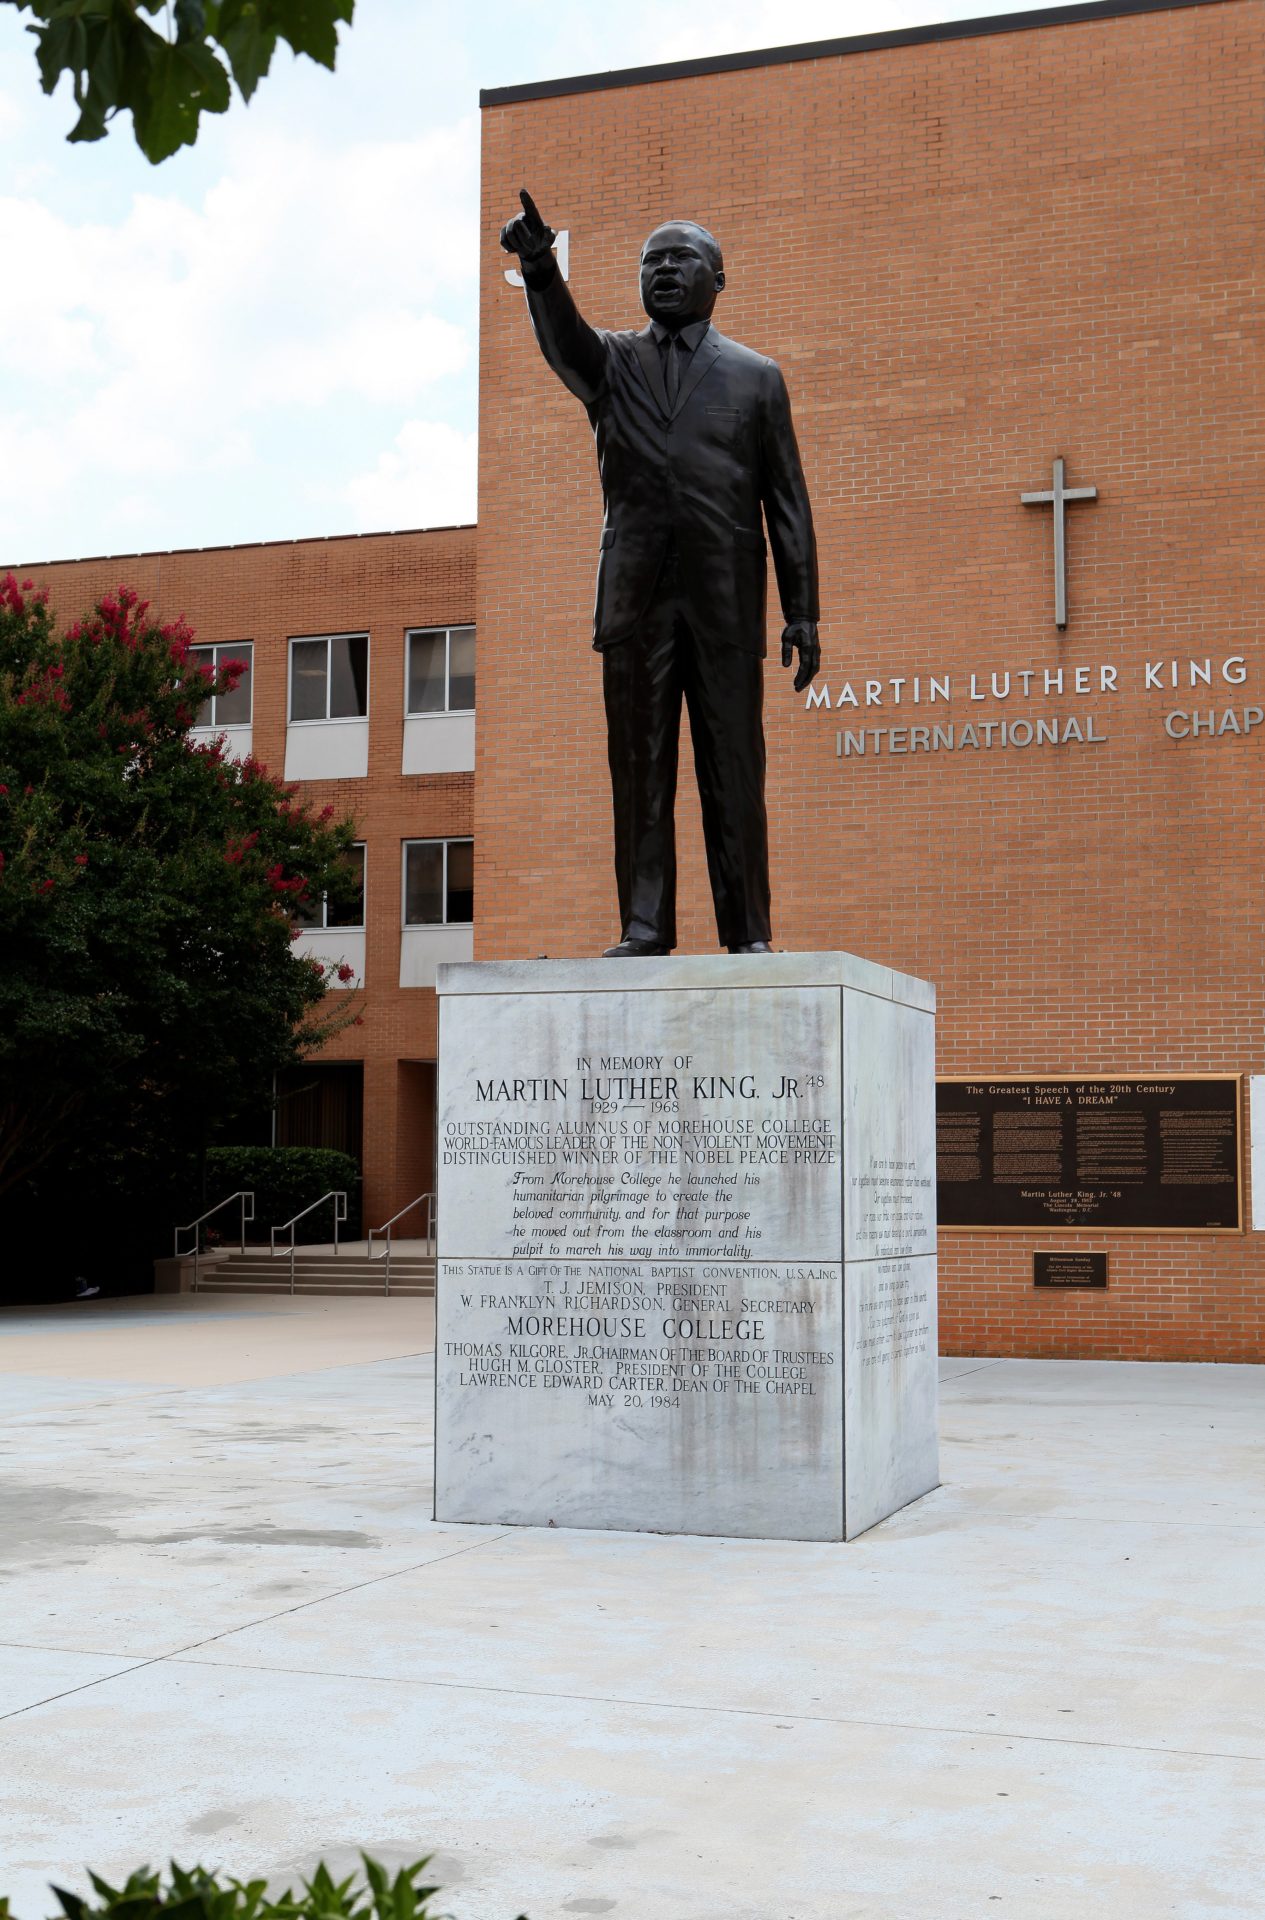 A statue of Dr. Martin Luther King, Jr.